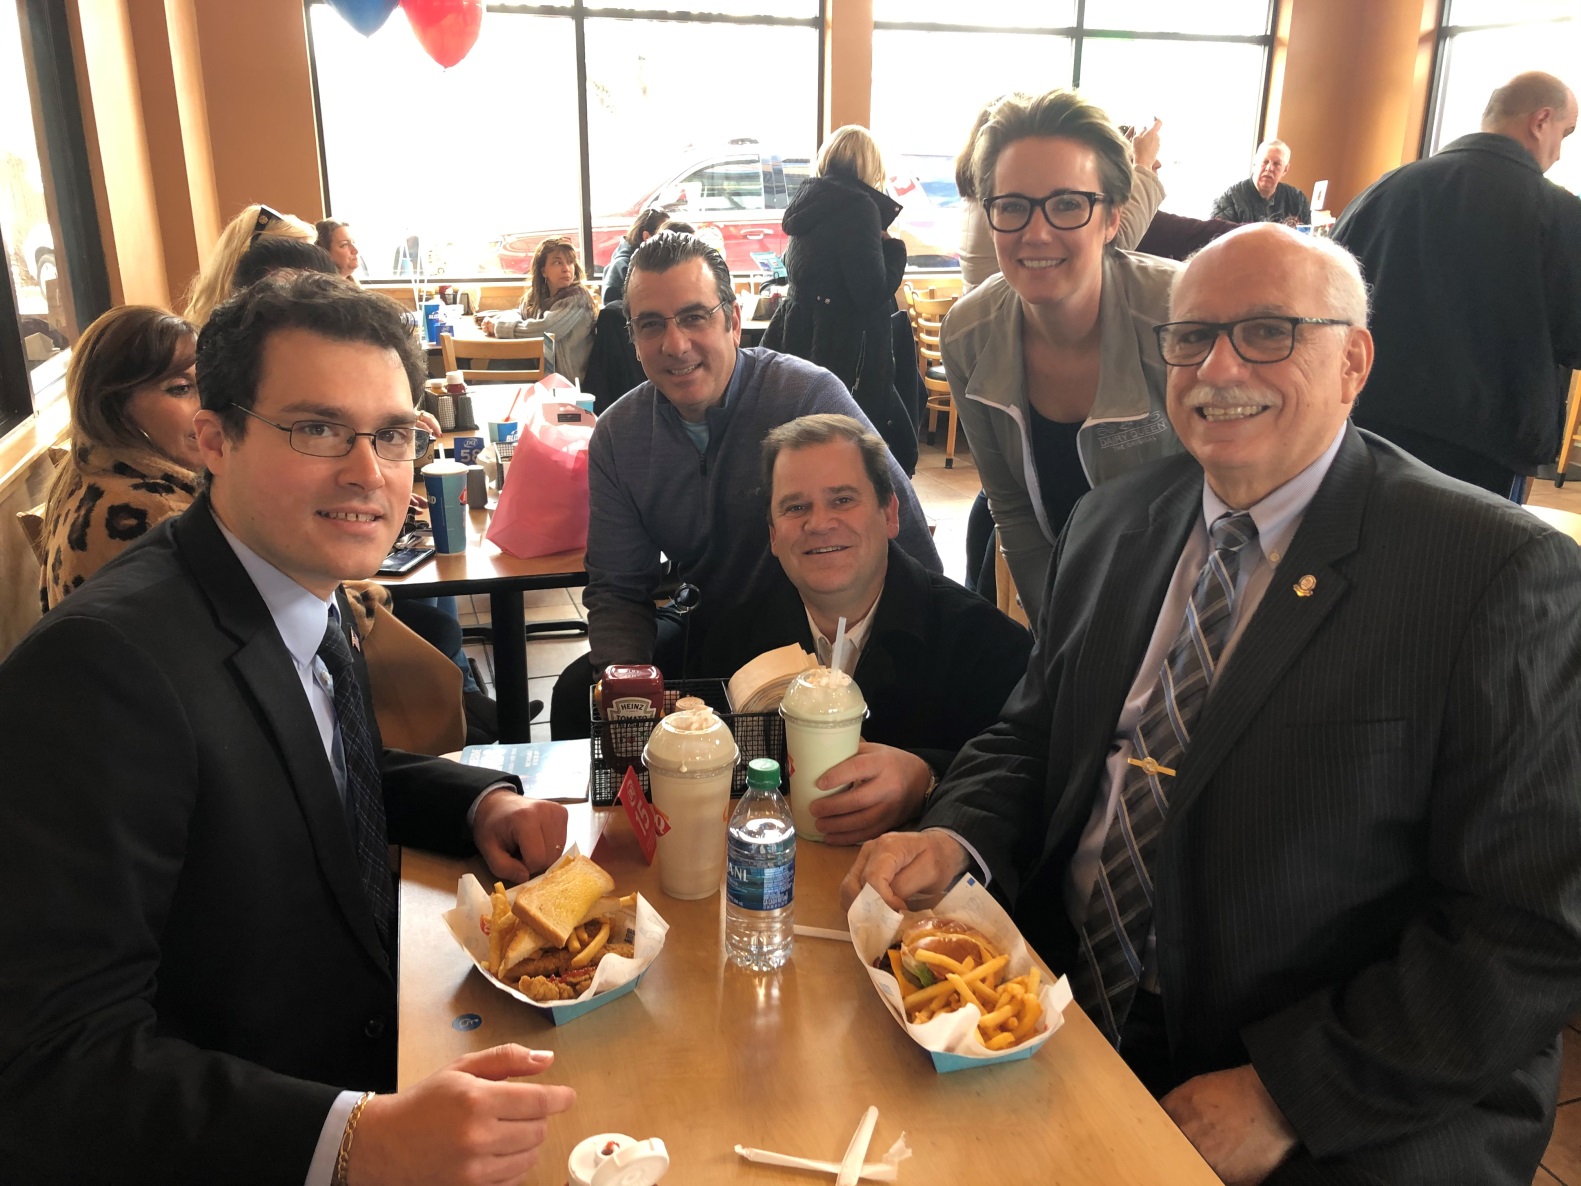 Assemblyman John Mikulin (R,C,I-Bethpage) joined (from left to right) Councilman Dennis Dunne, Jeff Pravato, receiver of taxes, Councilwoman Laura Maier and Dennis McGrath at the North Massapequa Fire